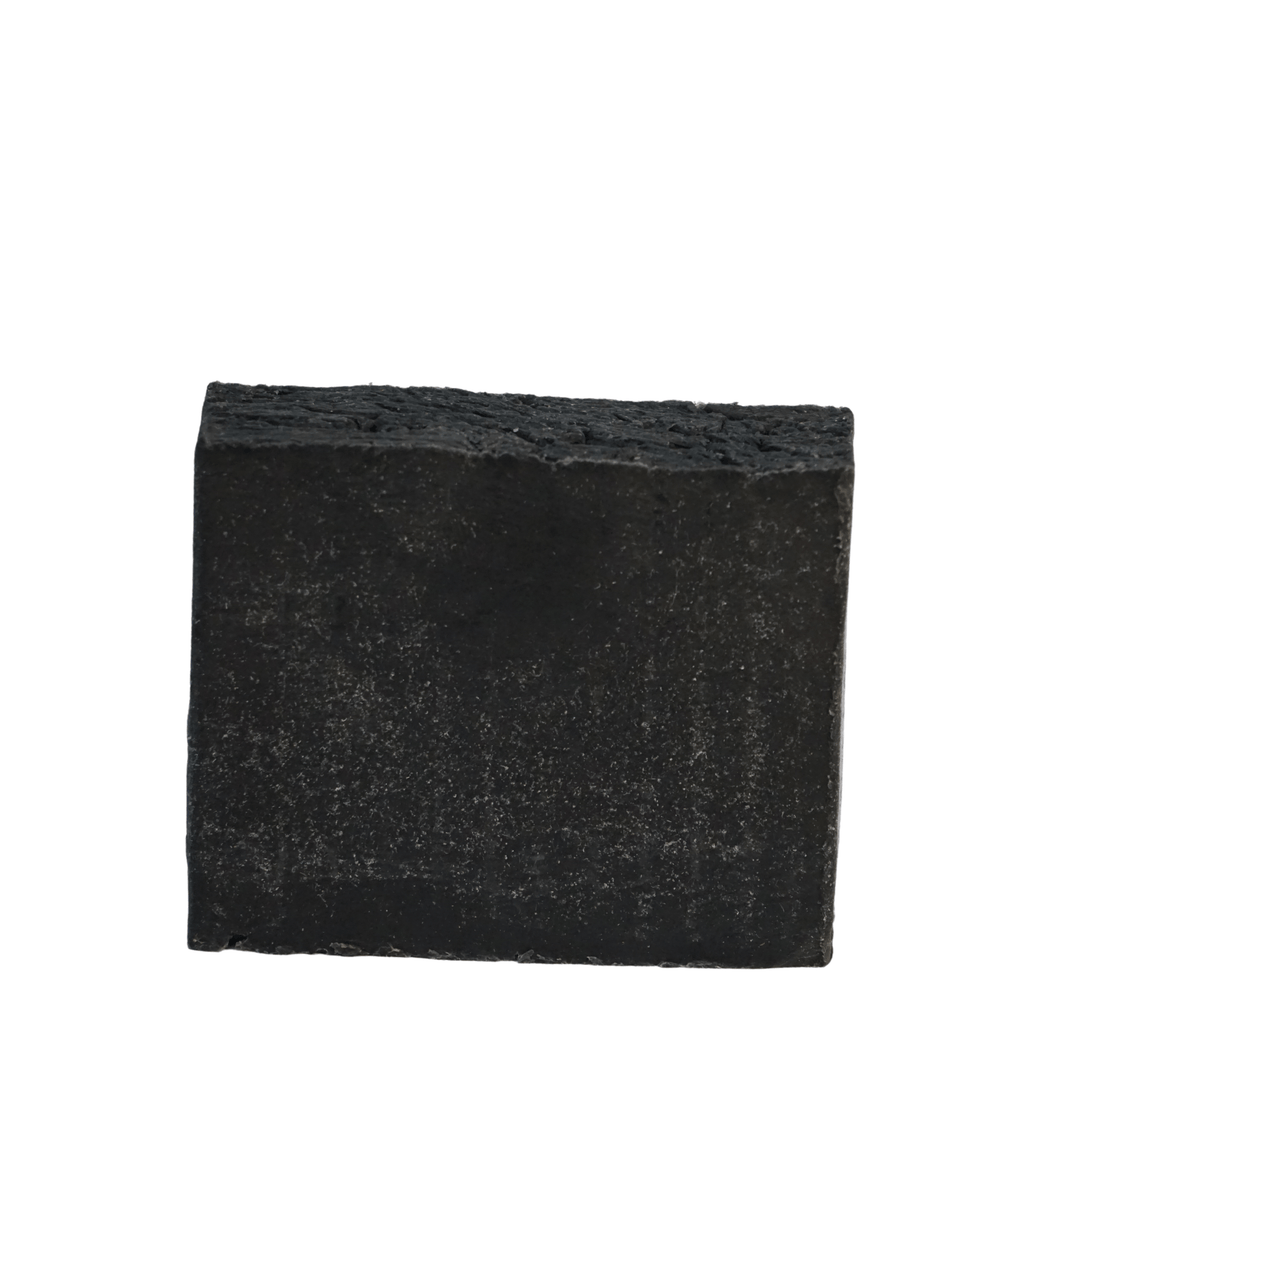 Activated Charcoal Organic Soap